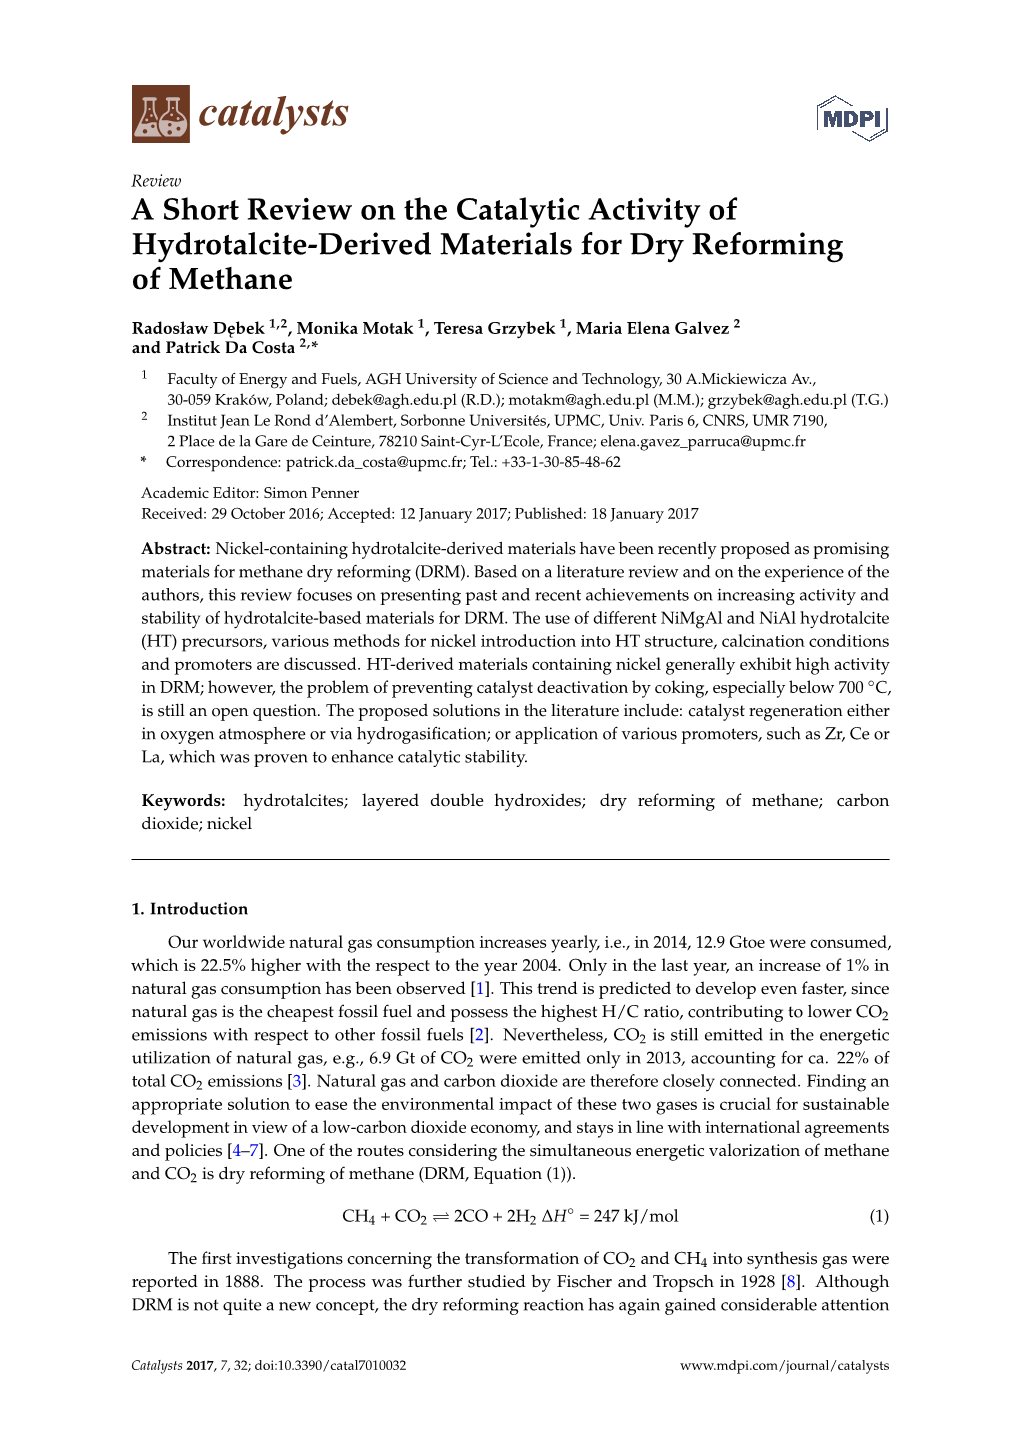 A Short Review on the Catalytic Activity of Hydrotalcite-Derived Materials for Dry Reforming of Methane